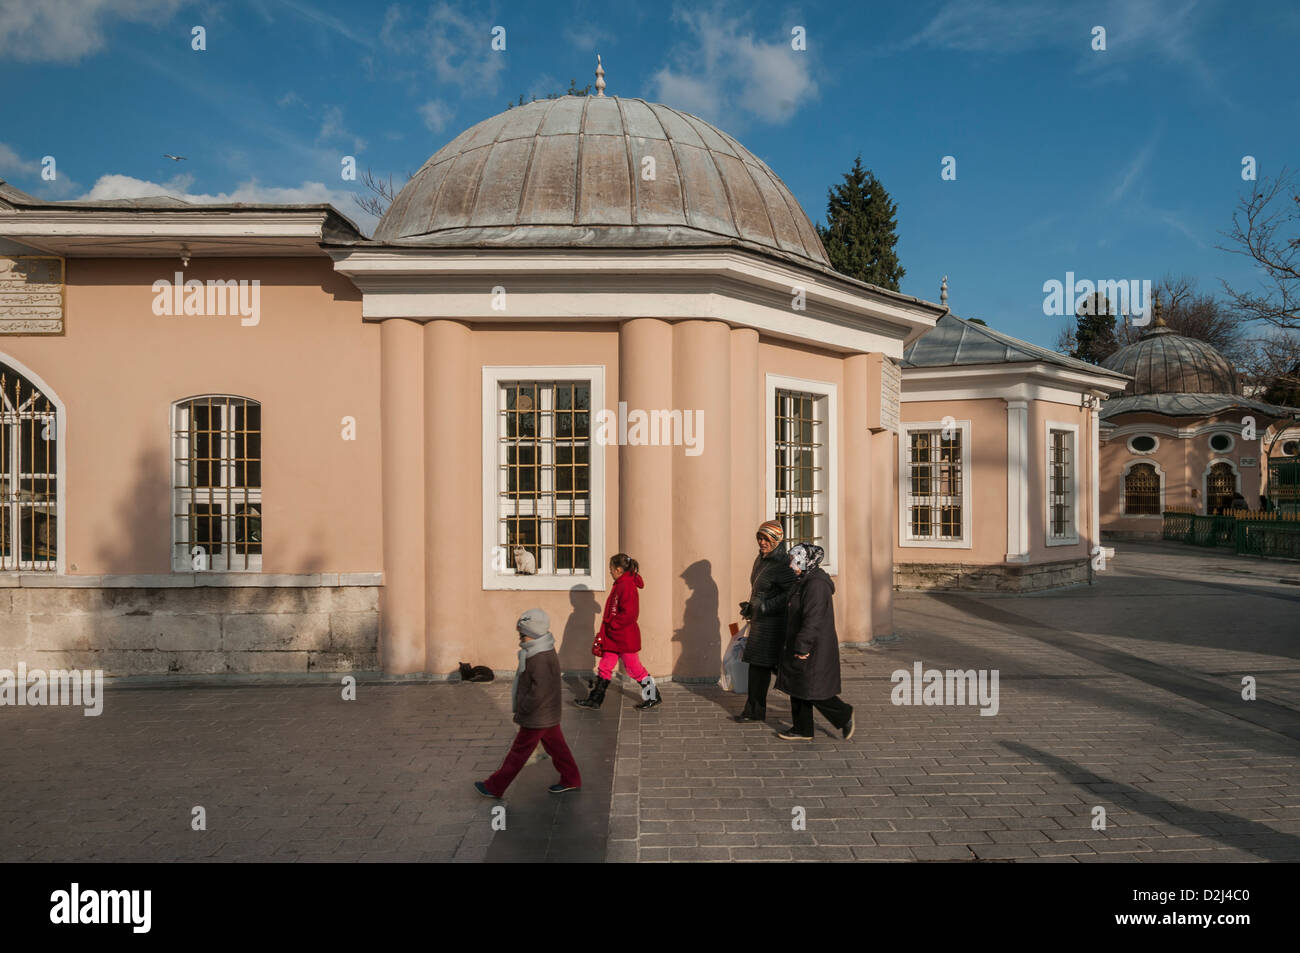 The tomb of Sunbul Efendi and Mosque in the Kocamustafa complex in Istanbul. Stock Photo